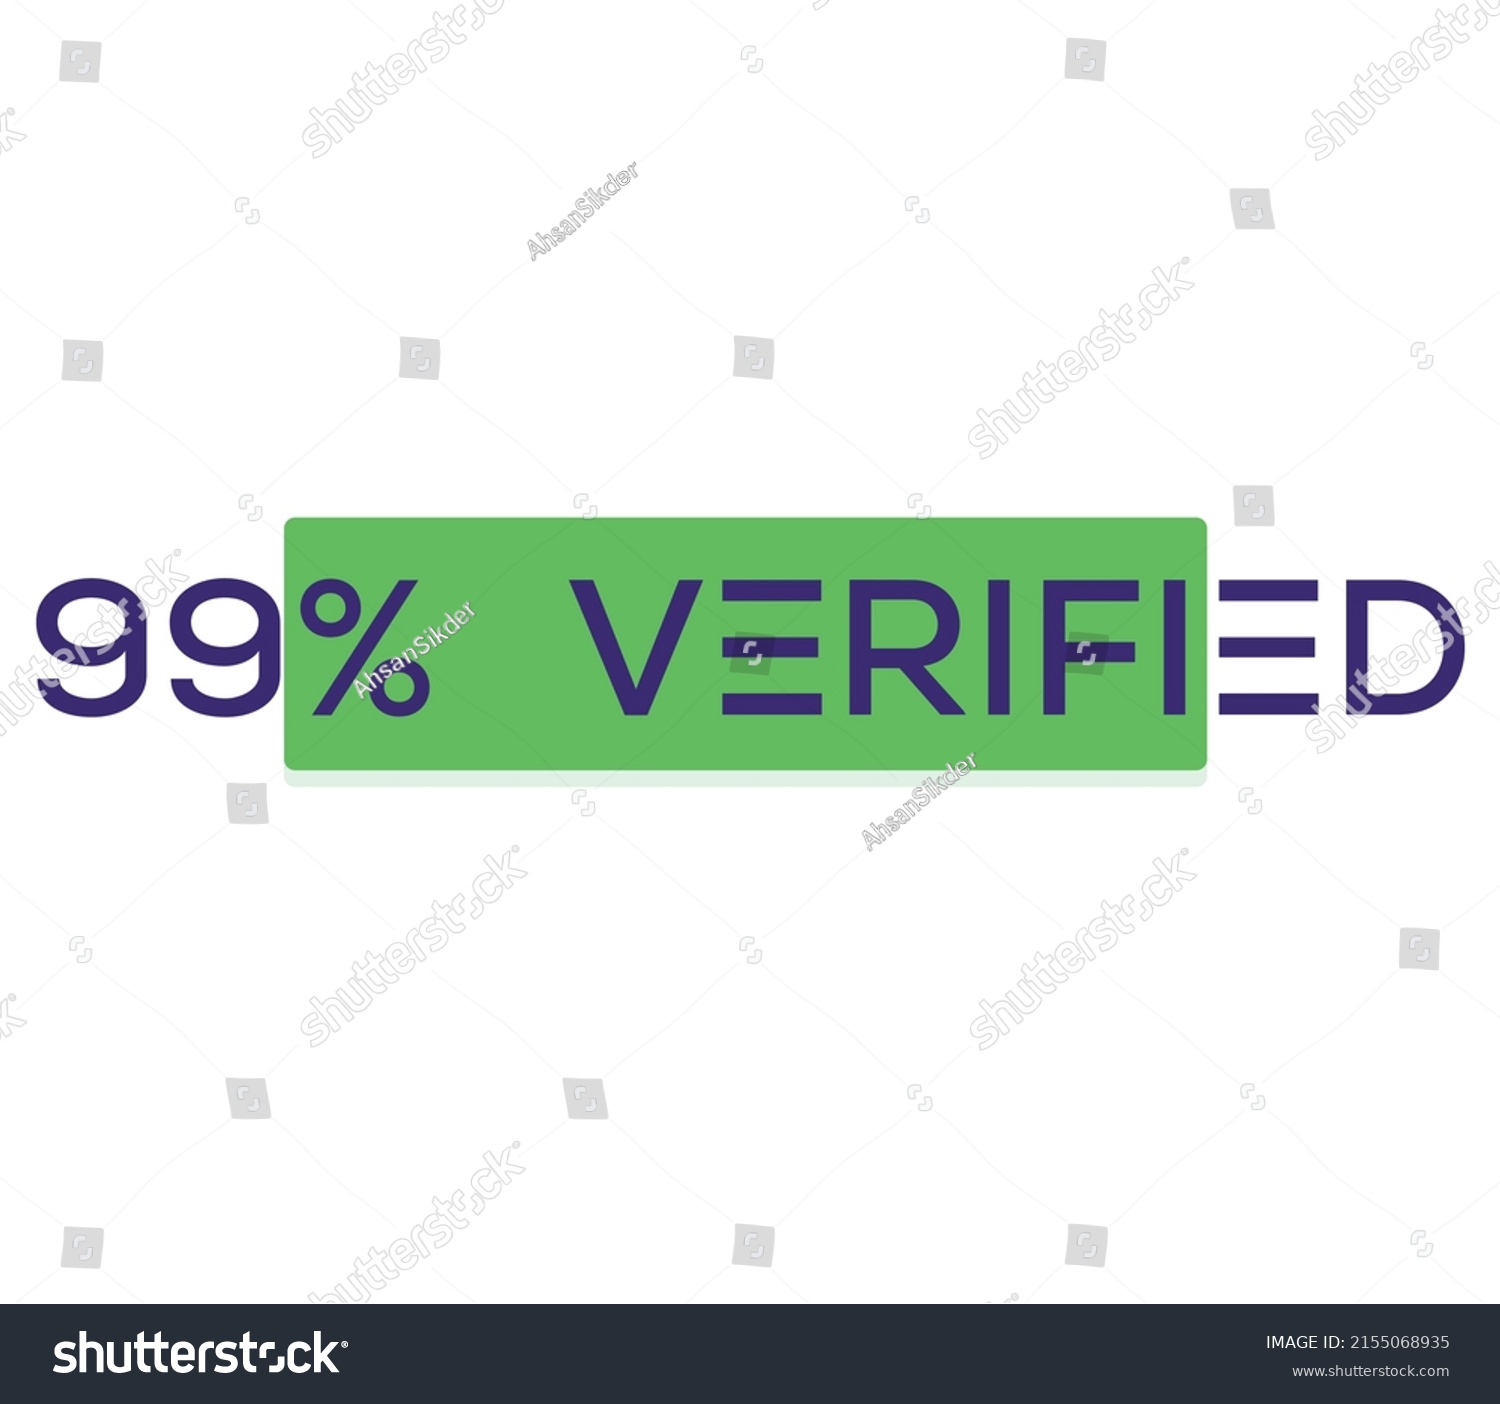 99% percentage verified vector art illustration with fantastic font and green color #2155068935